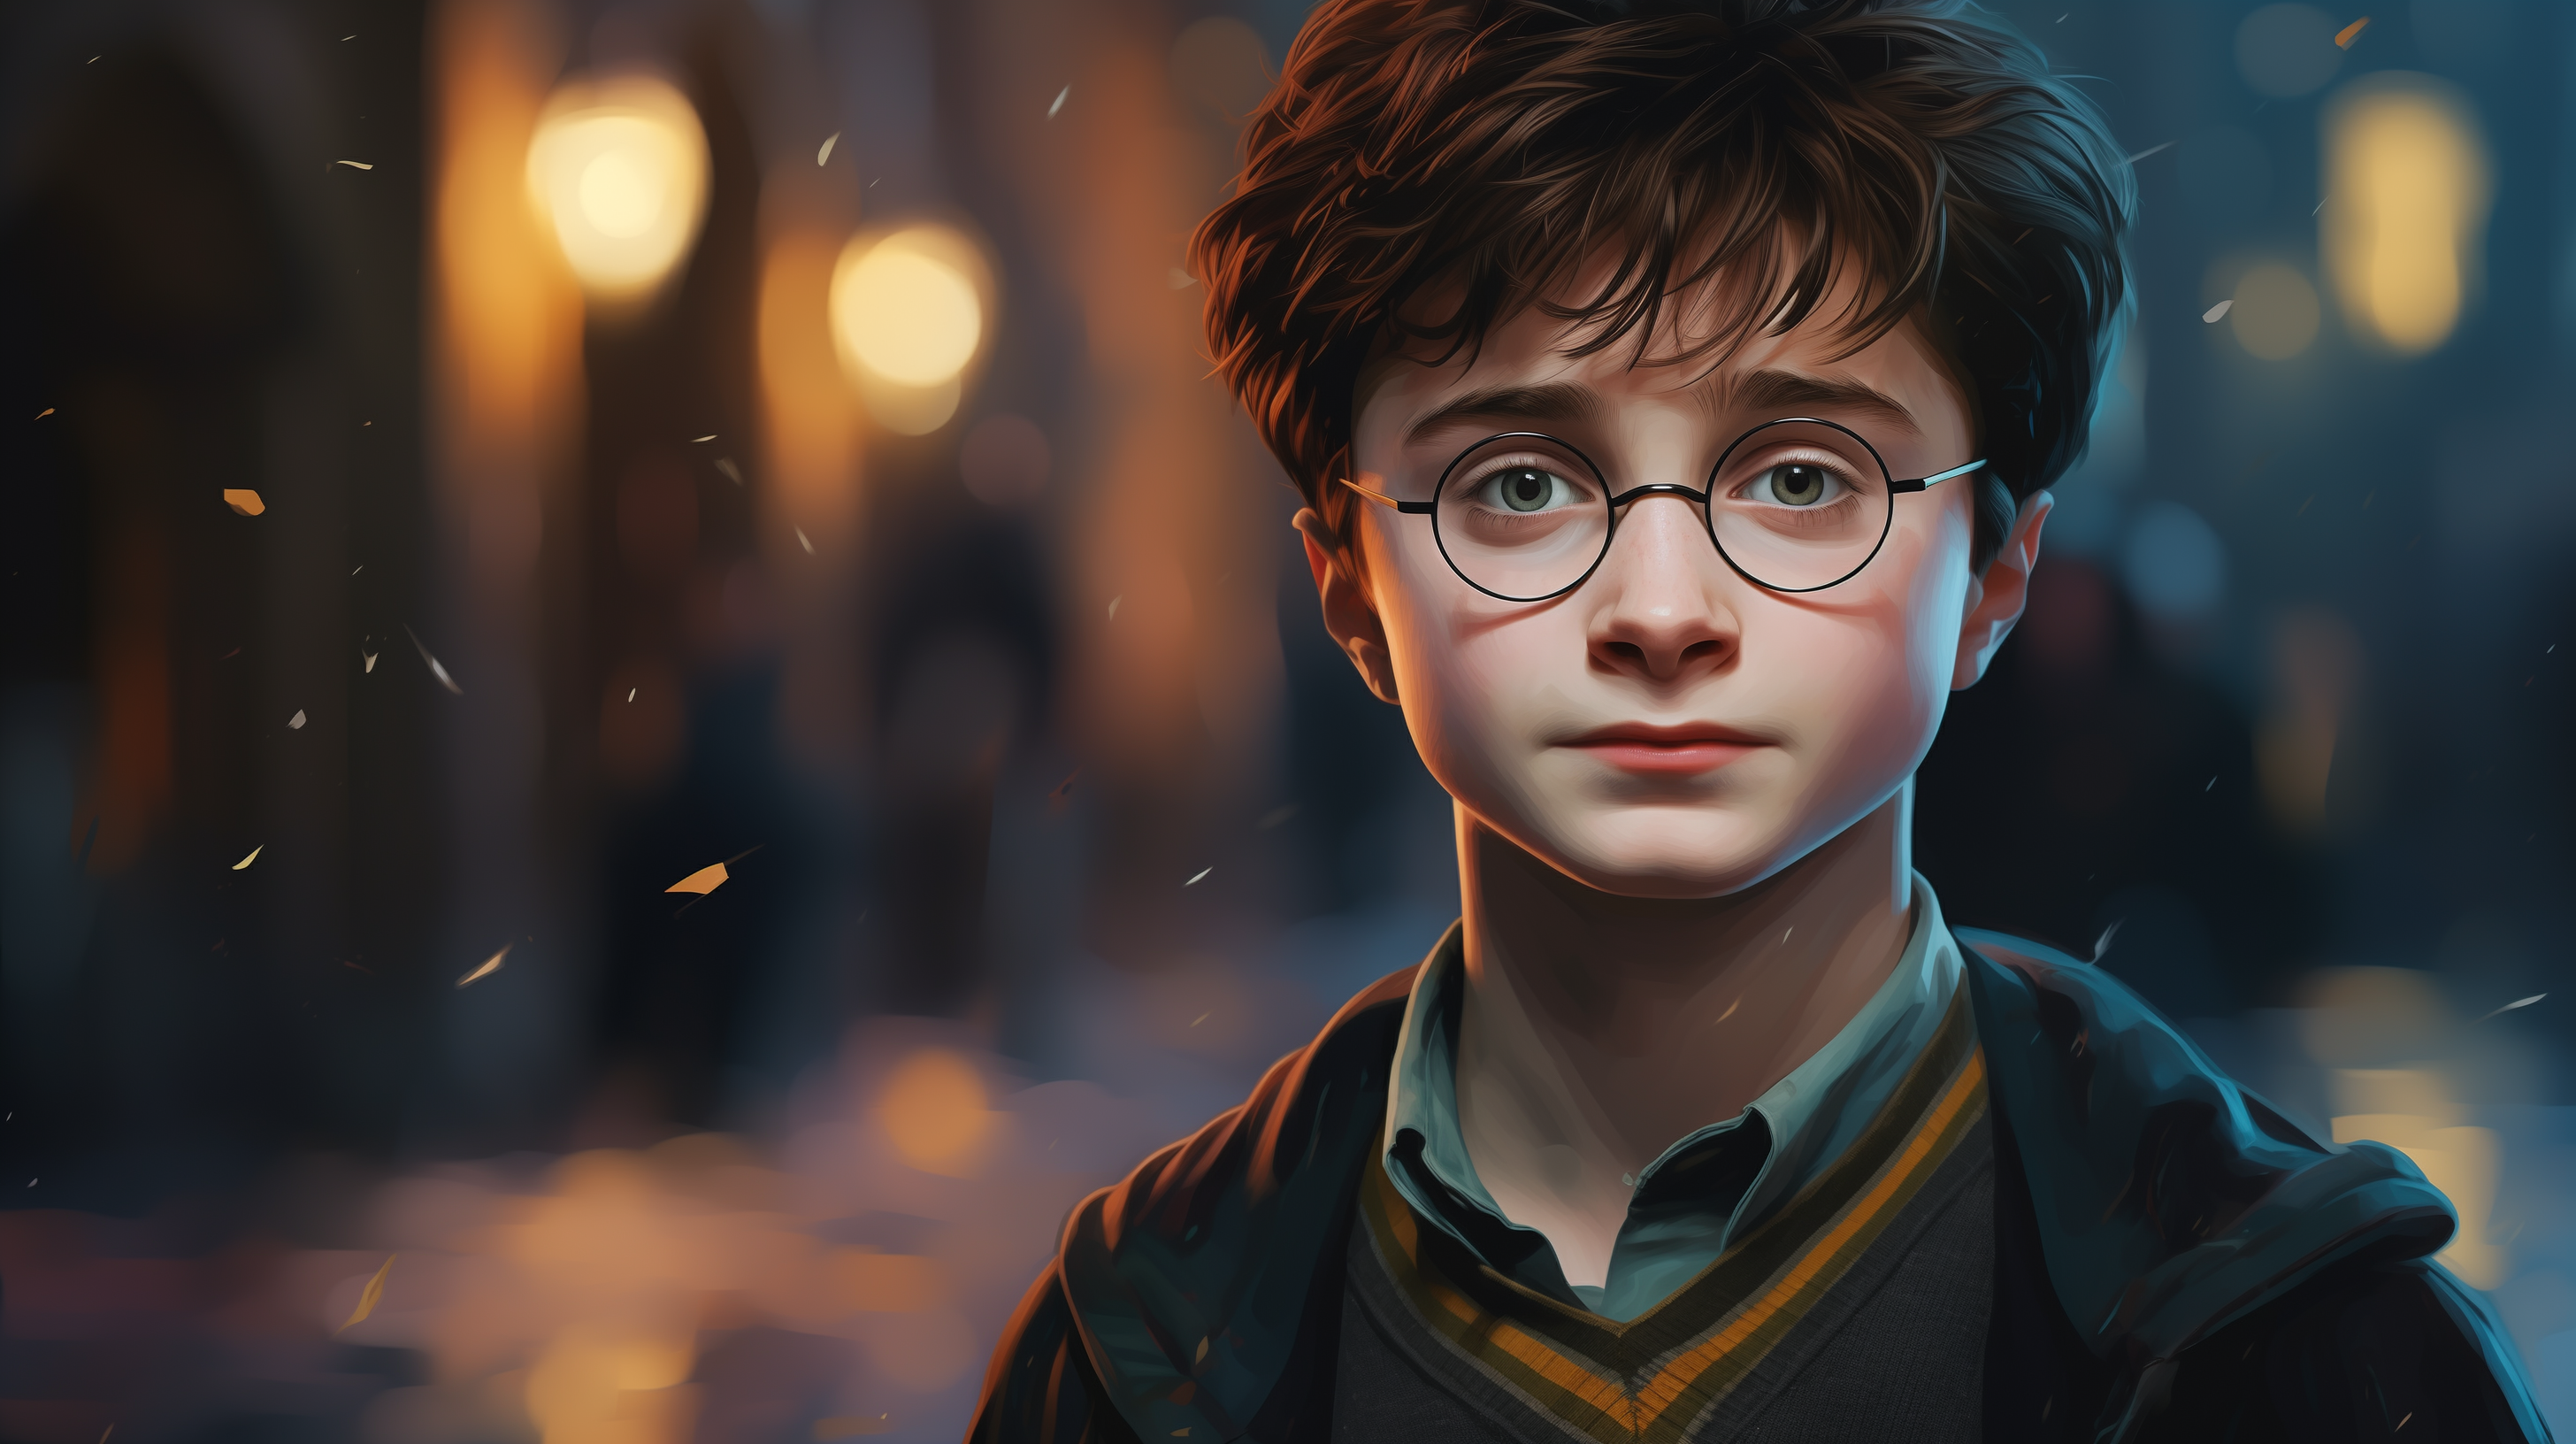 High-definition desktop wallpaper featuring an artistic representation of a young wizard character with glasses from the Harry Potter series, set against a blurred magical alley backdrop.